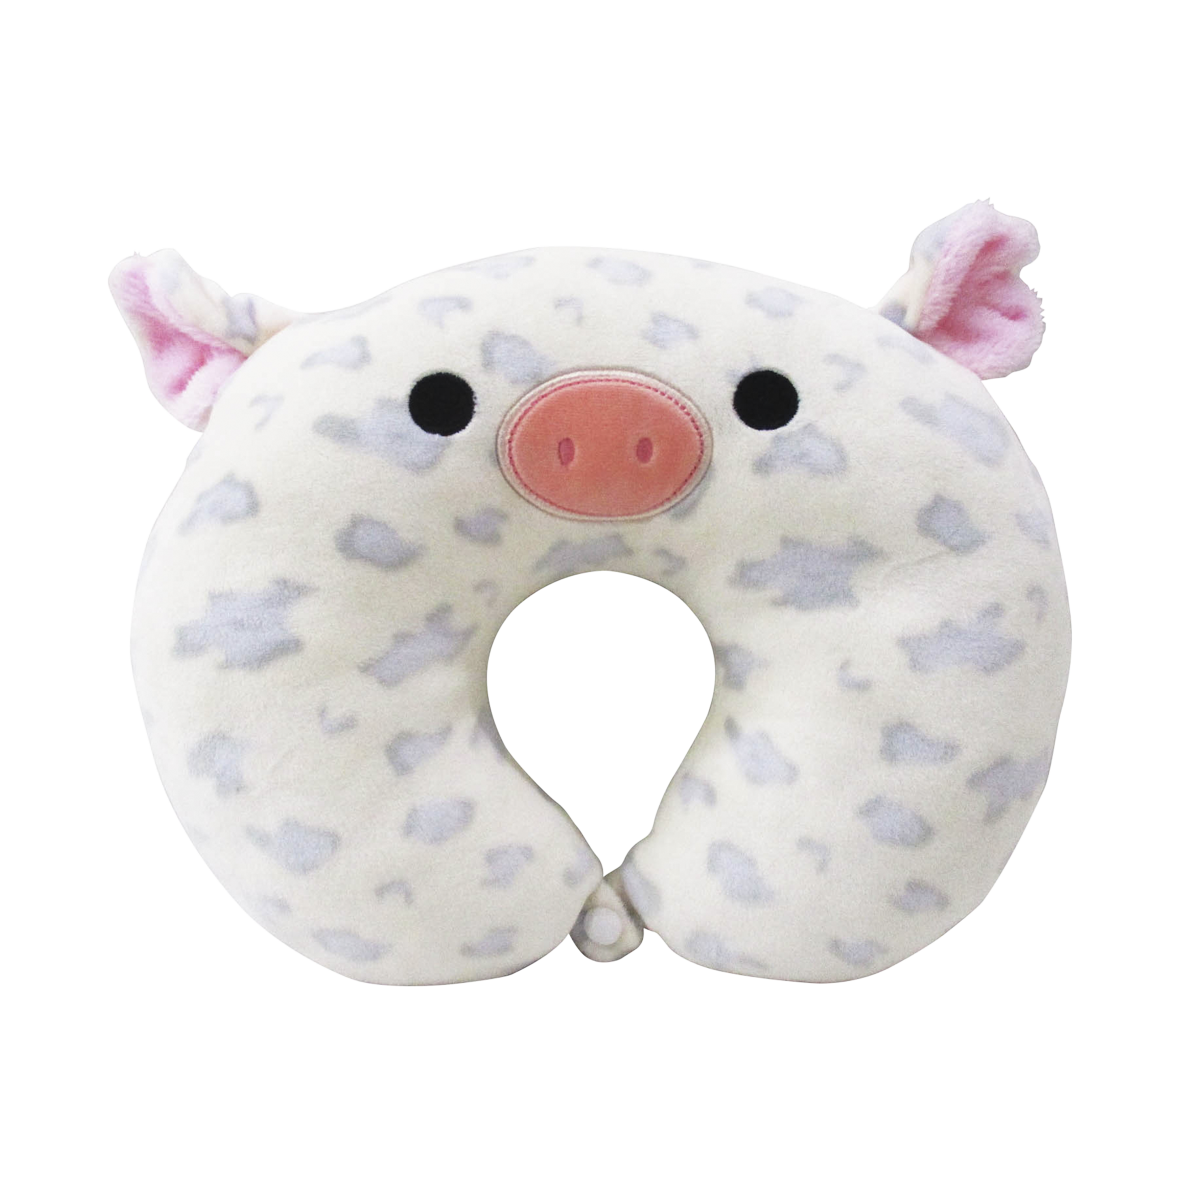 neck pillow that looks like a pig